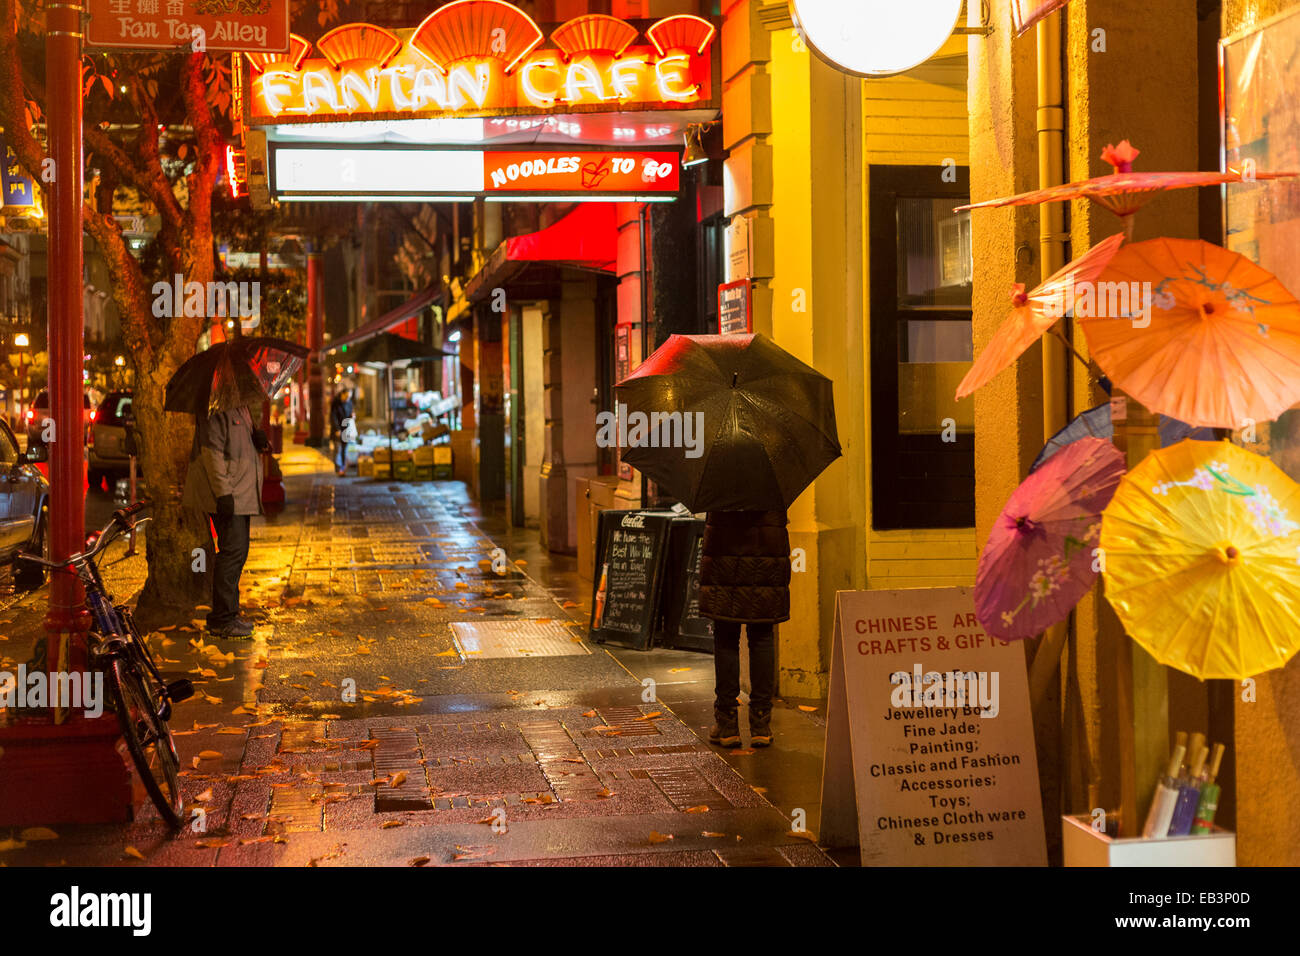 Chinese couple at Fan Tan alley entrance in Chinatown on rainy night-Victoria, British Columbia, Canada. Stock Photo